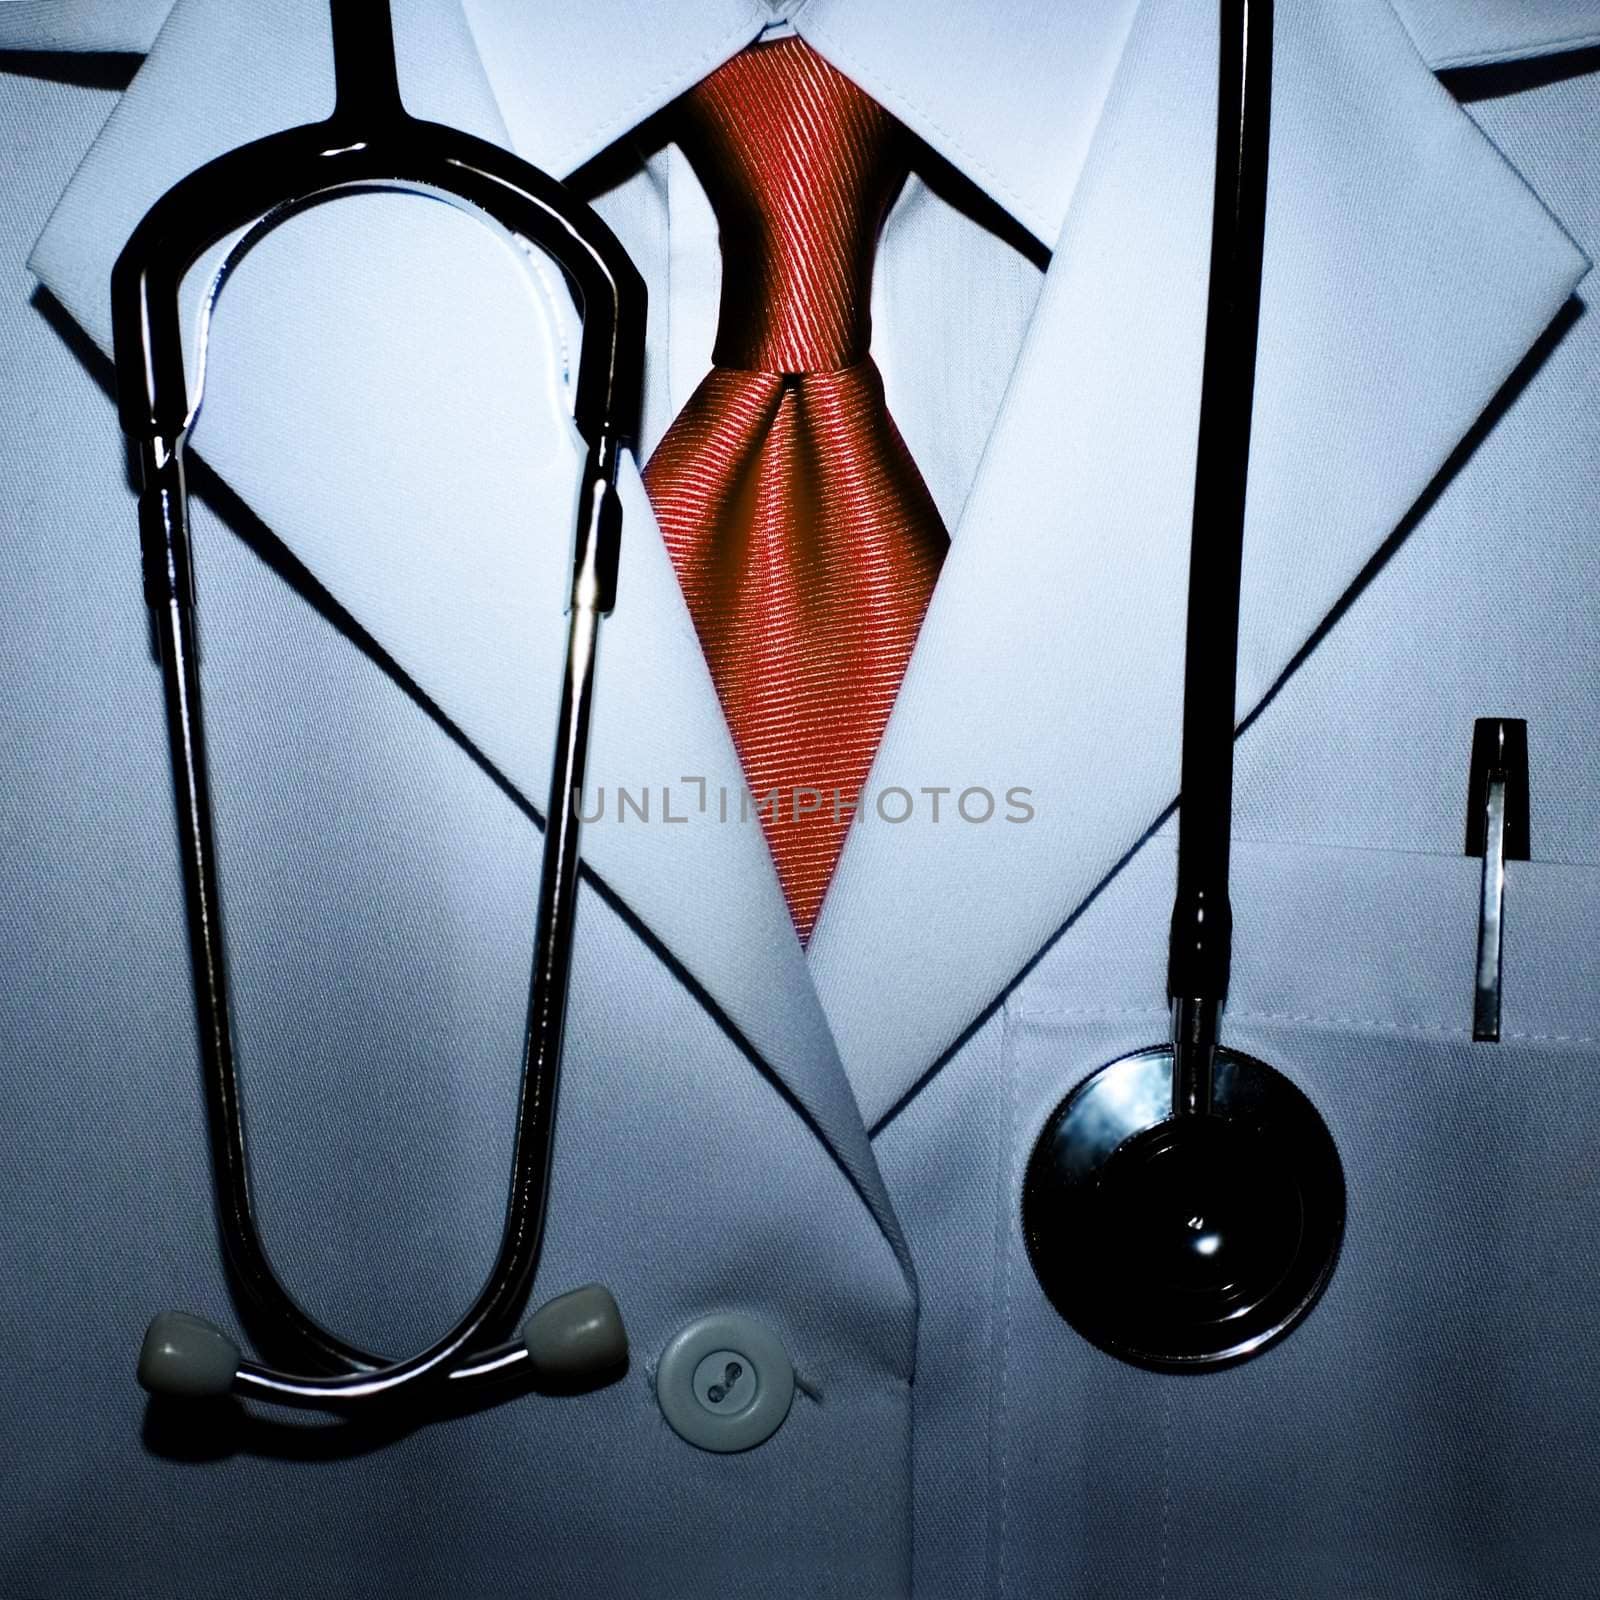 Conceptual photo of a scarry doctor with blood red tie.